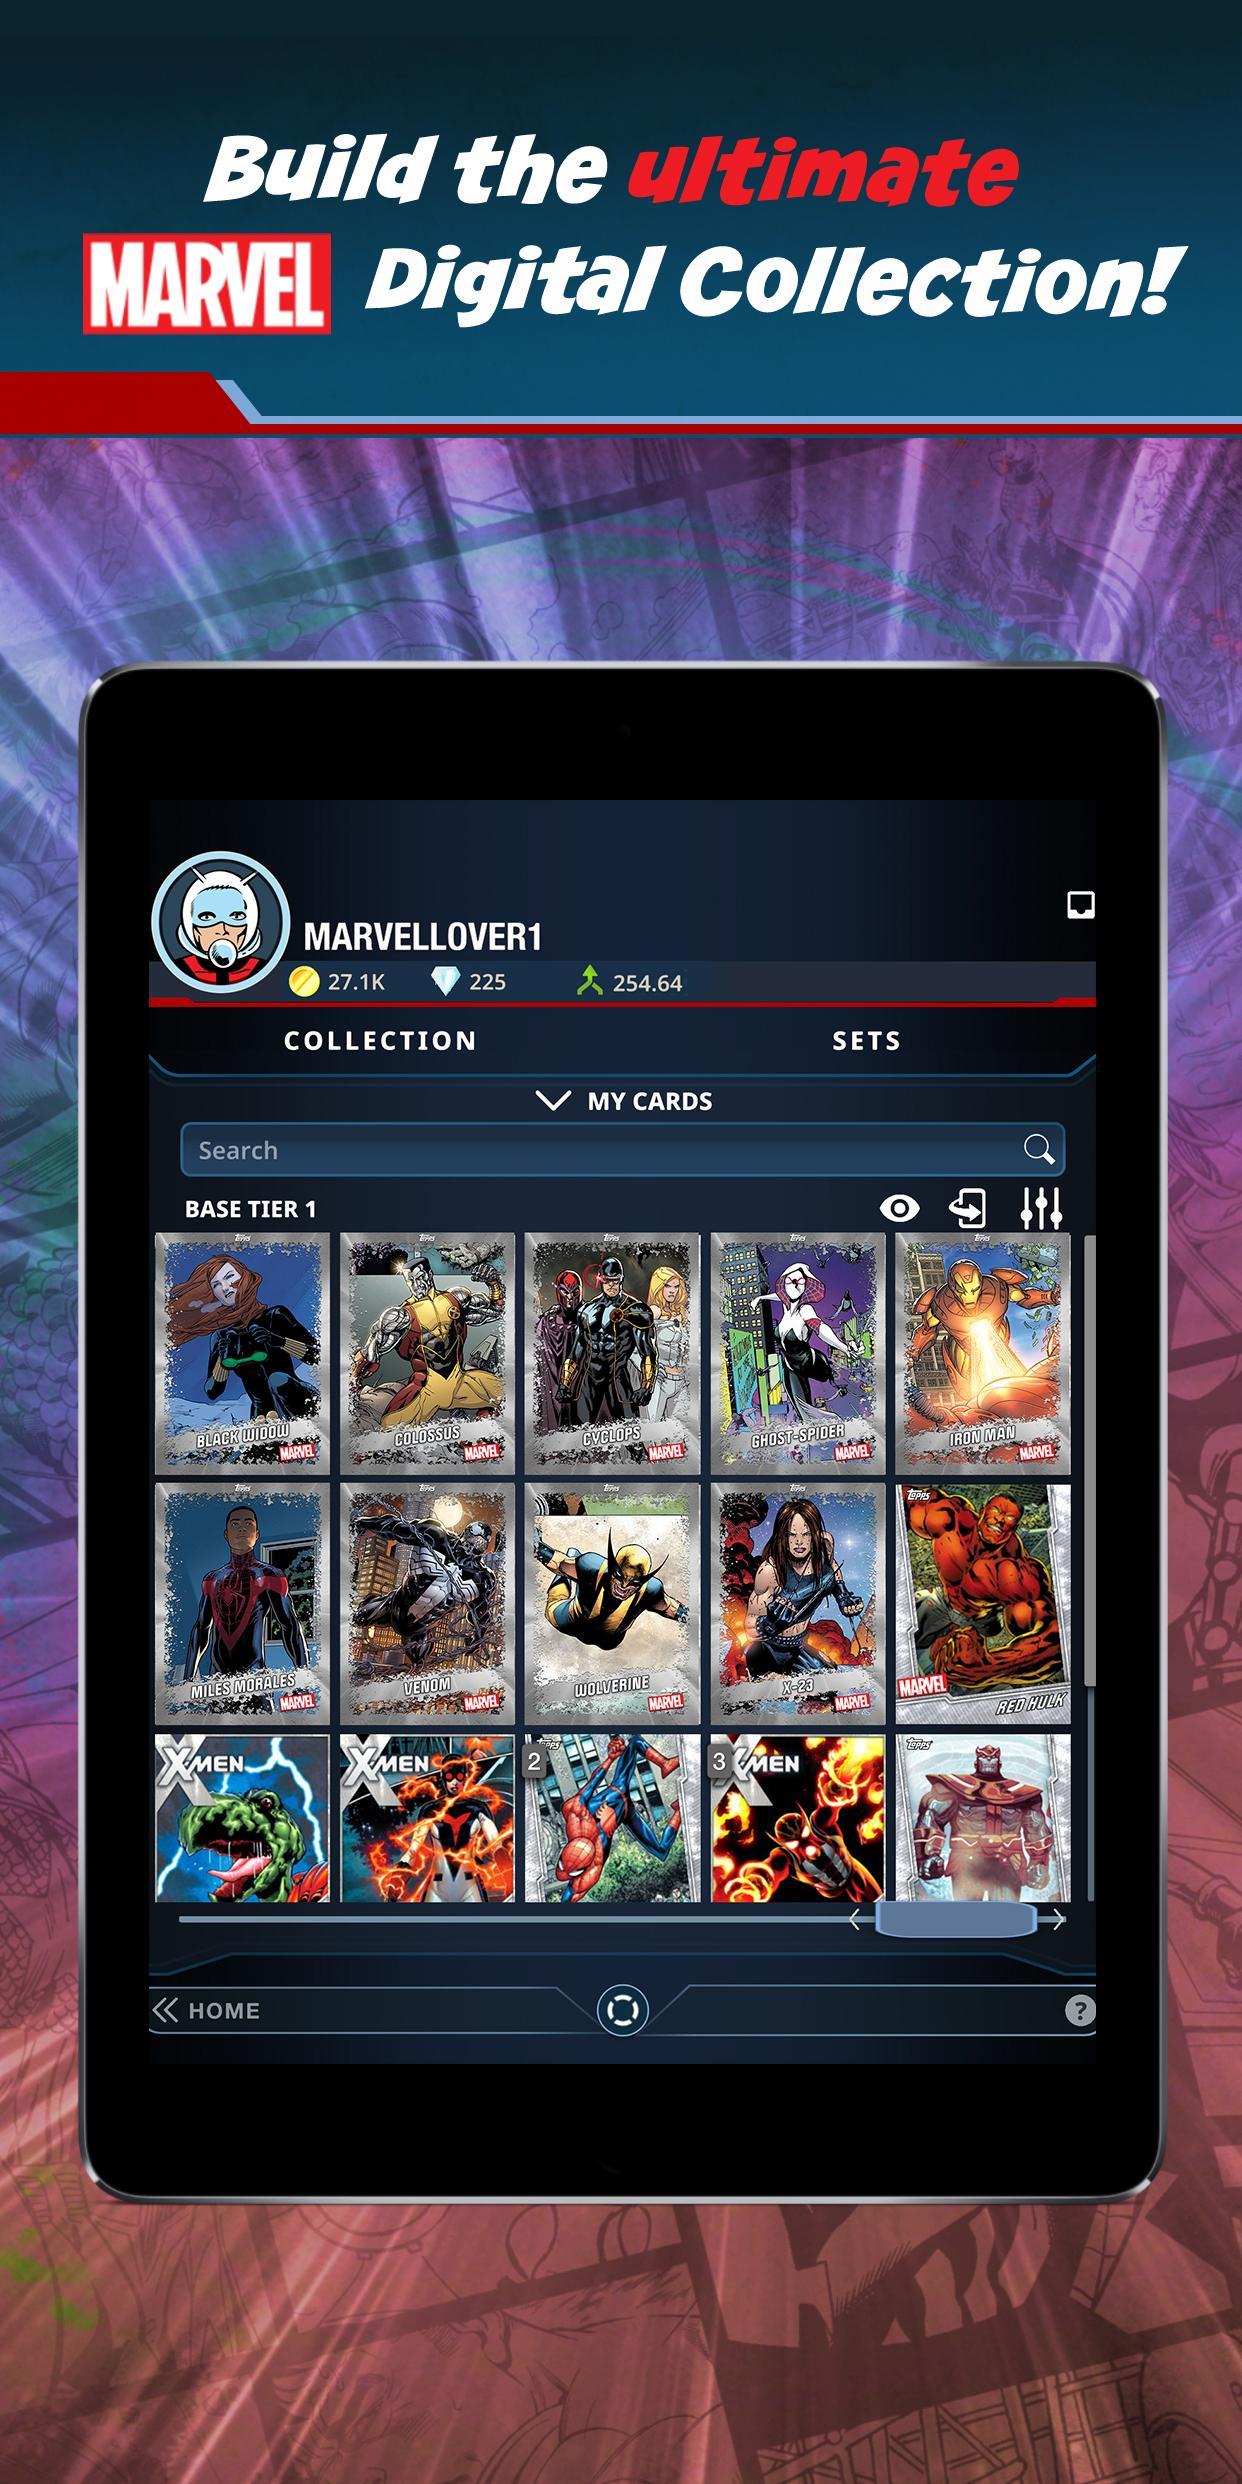 Marvel Collect! by Topps Card Trader 14.0.0 Screenshot 9